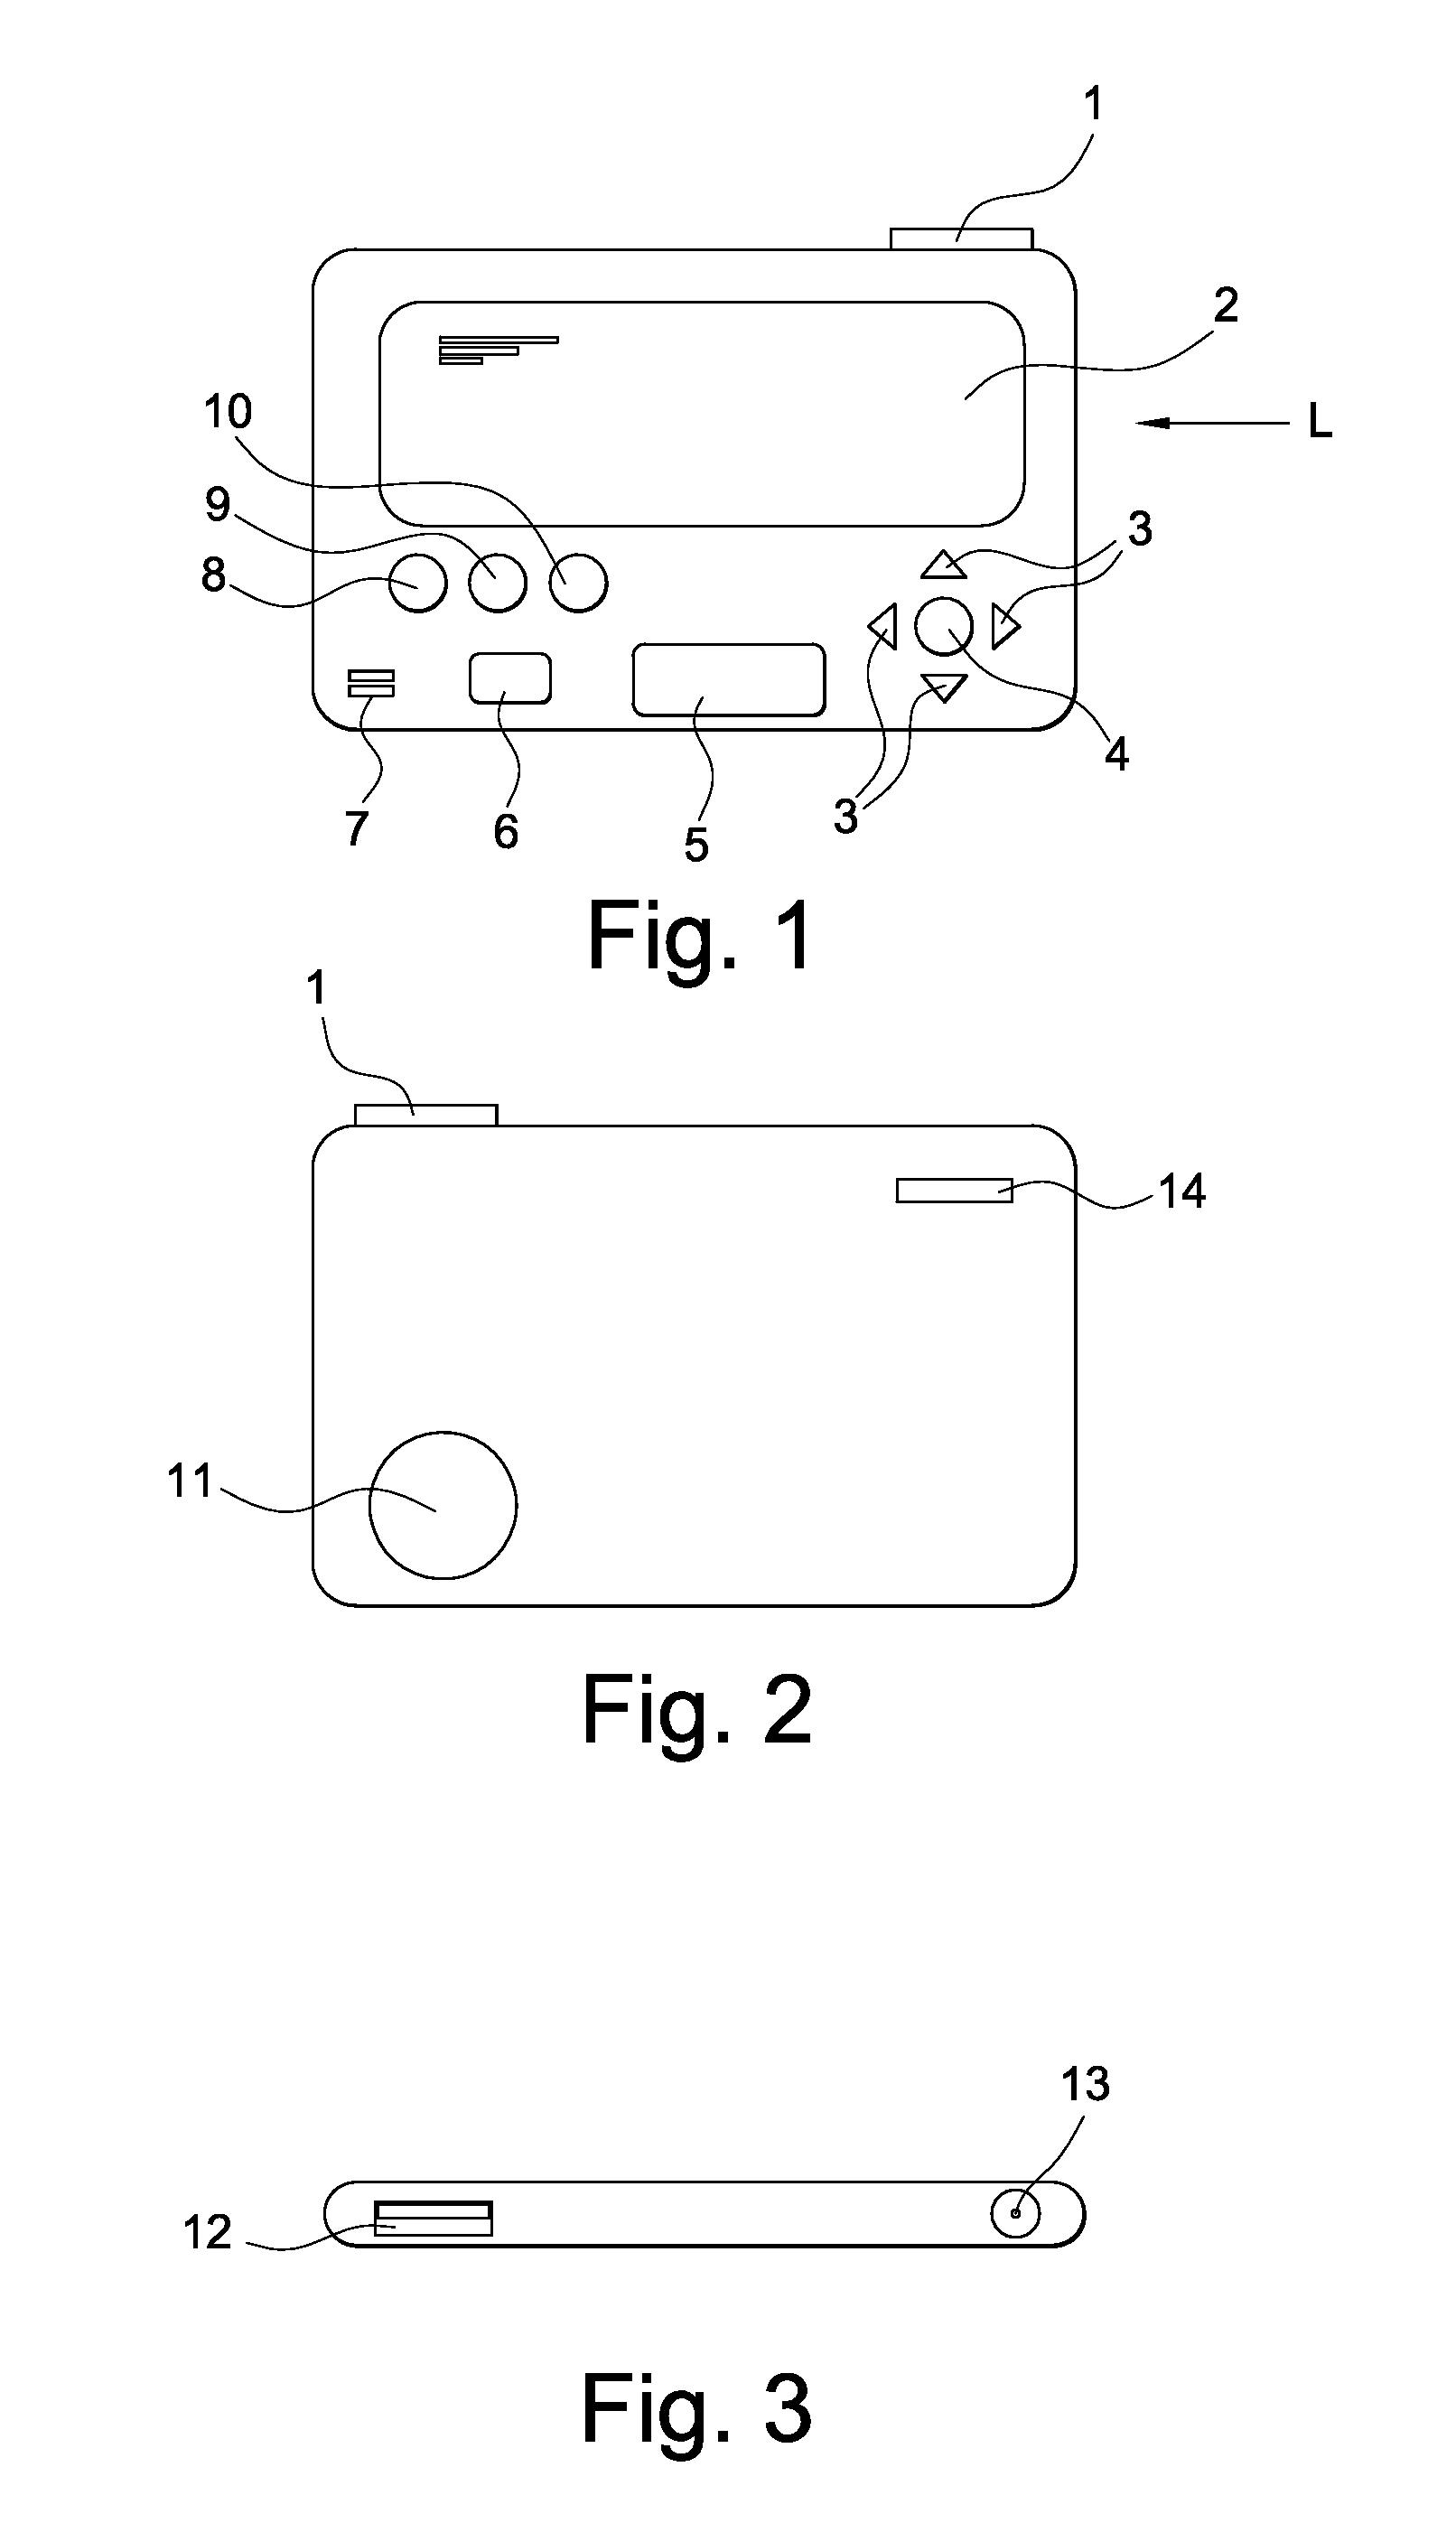 Lighter and method for eliminating smoking that includes interactive self-learning software